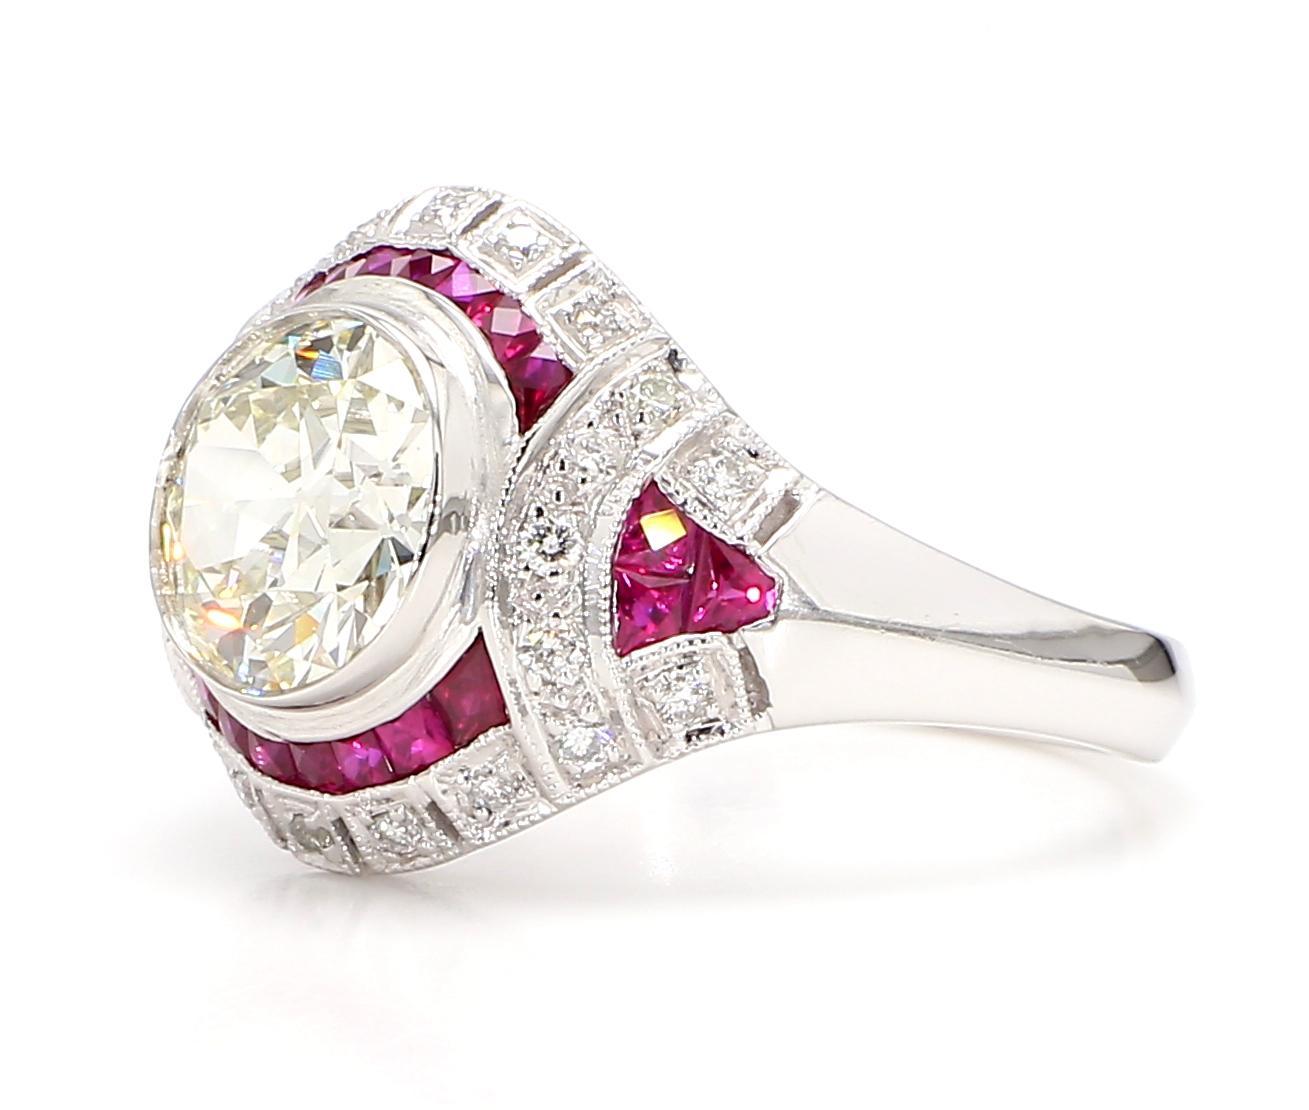 GIA Certified 2.56 Carat Diamond and 1.15 Carat Ruby Art Deco Platinum Ring For Sale 4